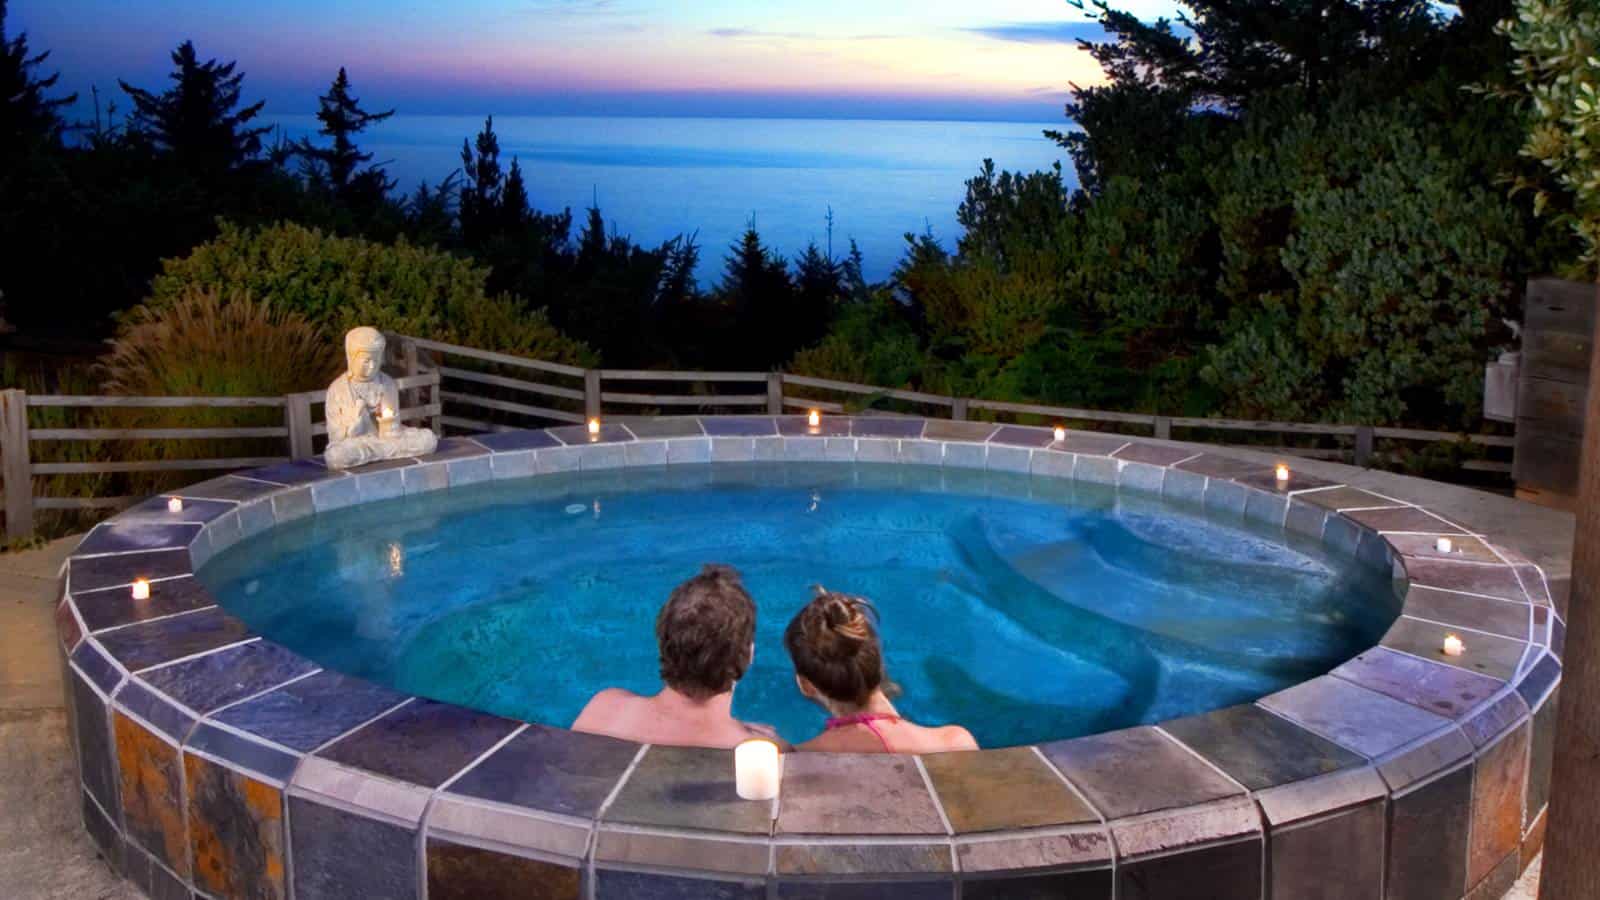 Man and woman sitting in large tiled hot tub looking out to the ocean at dusk